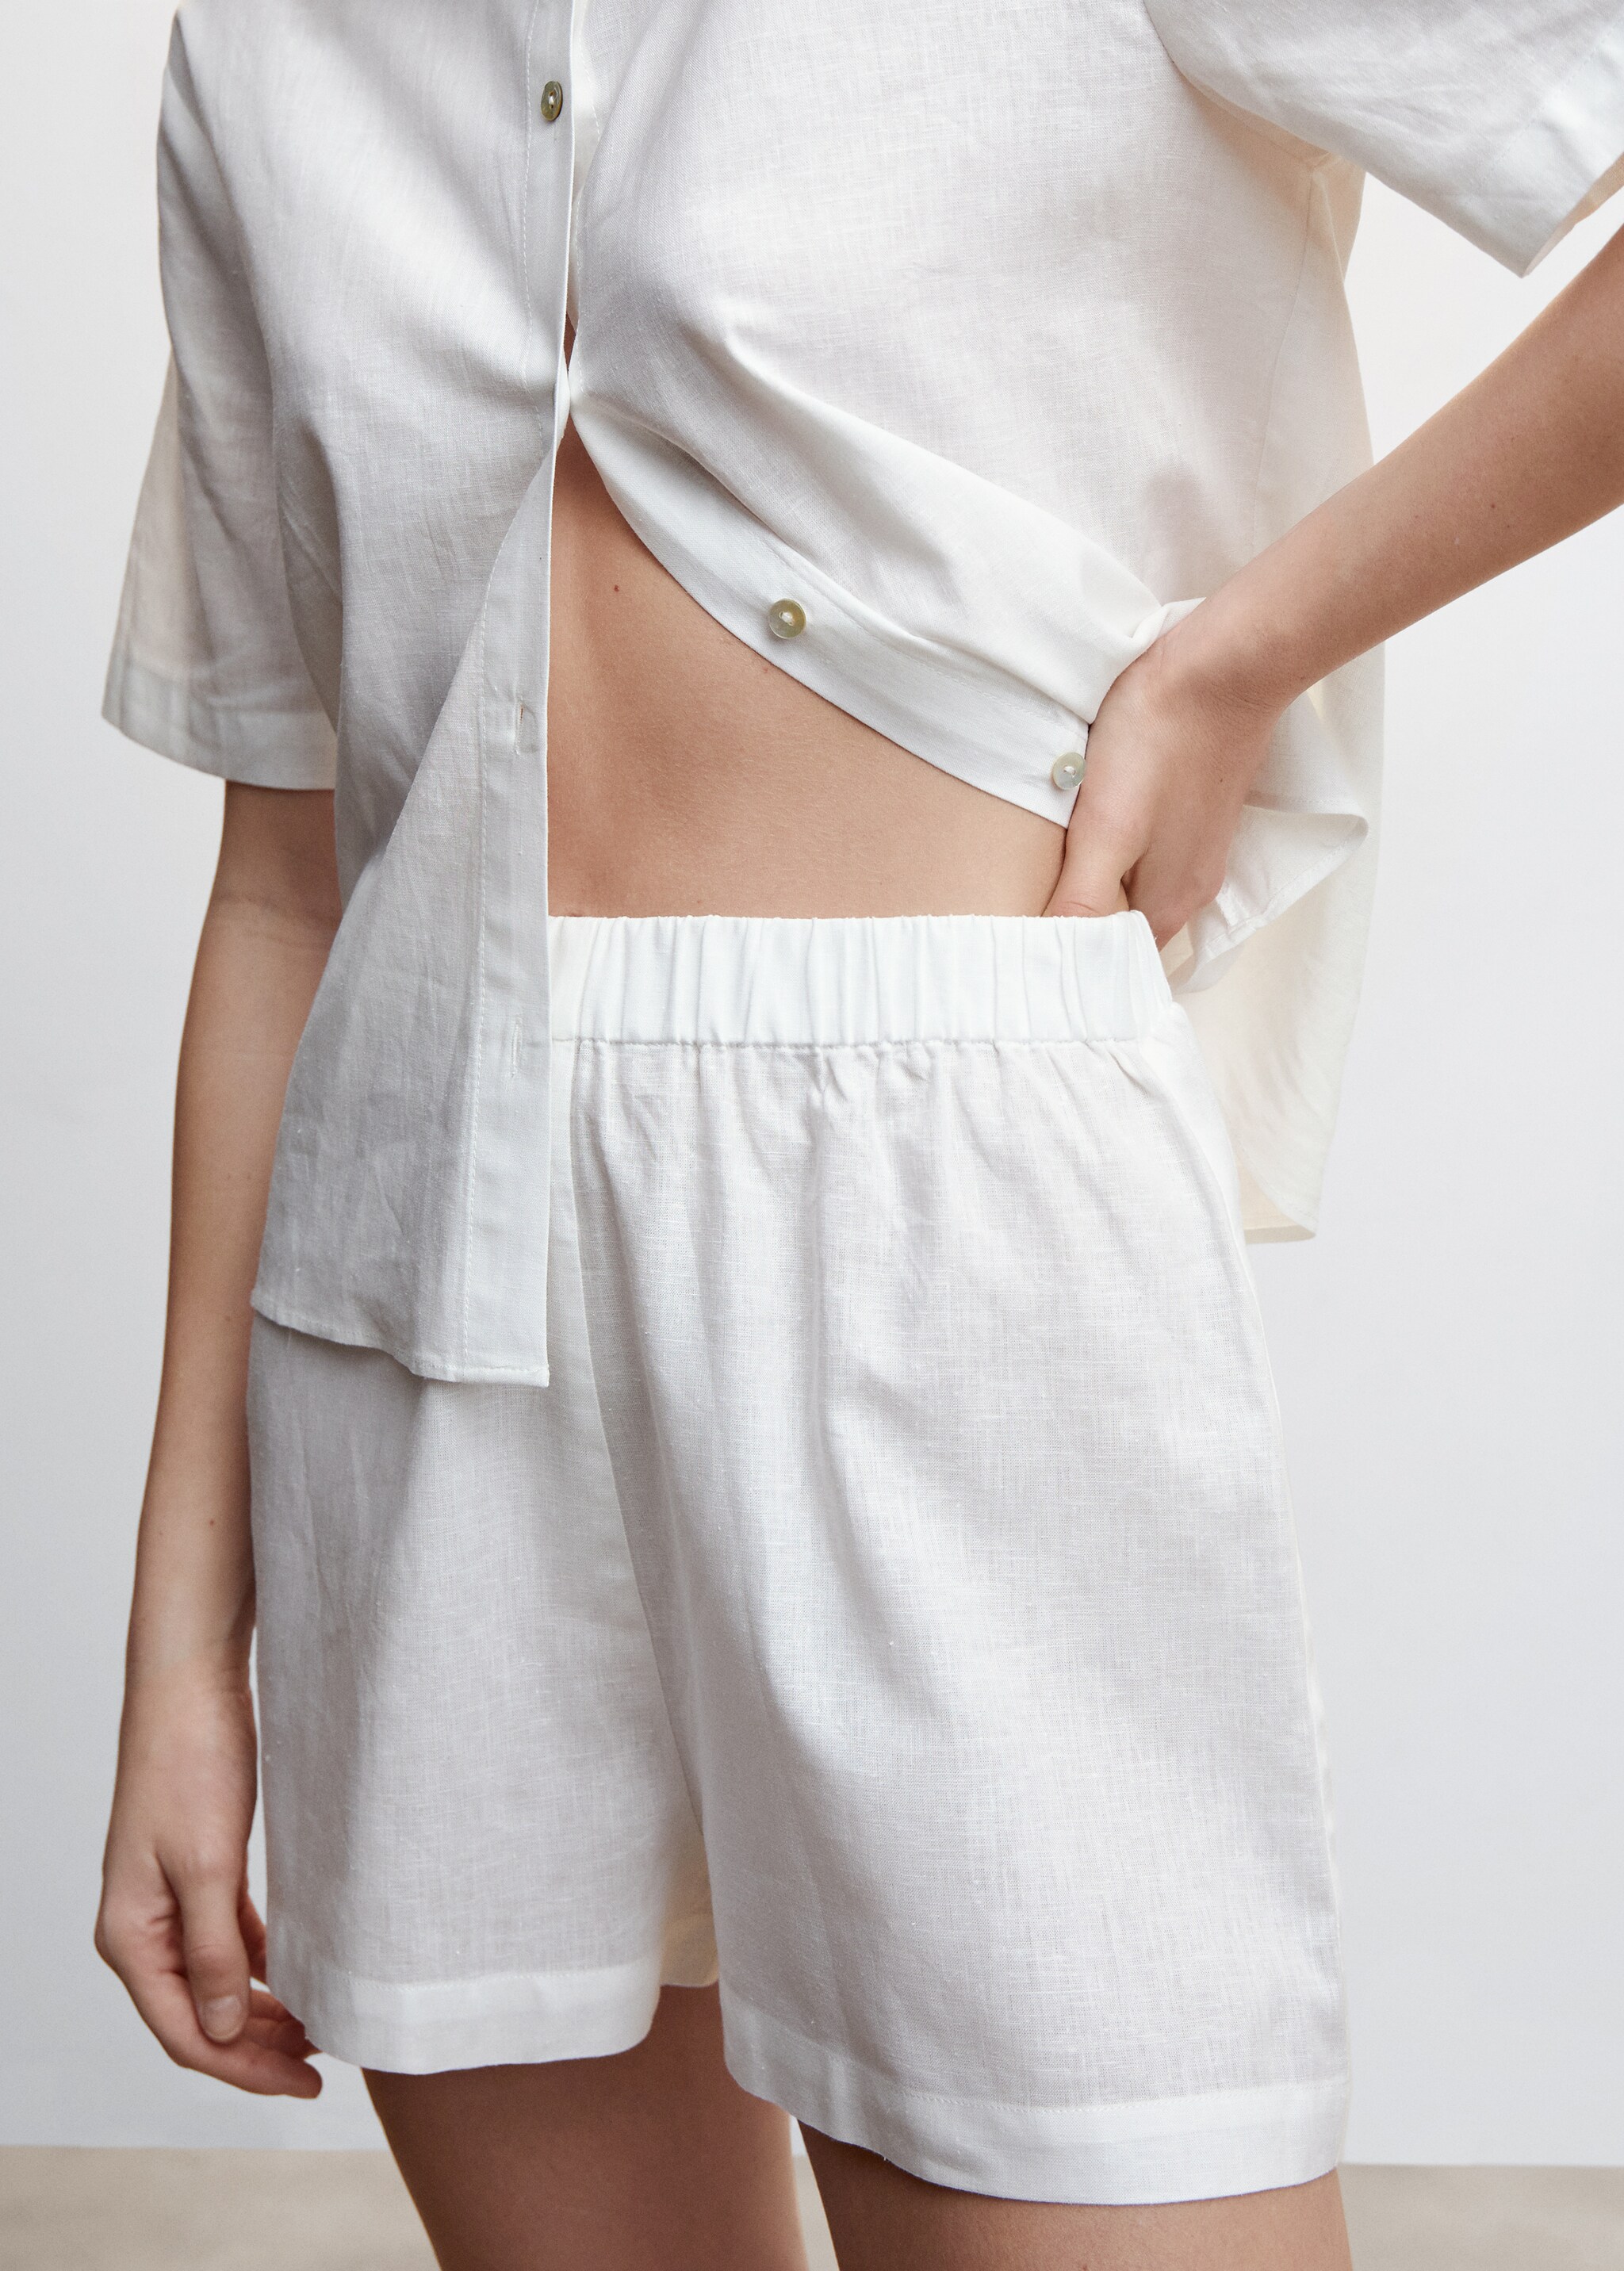 Linen pajama shorts - Details of the article 6